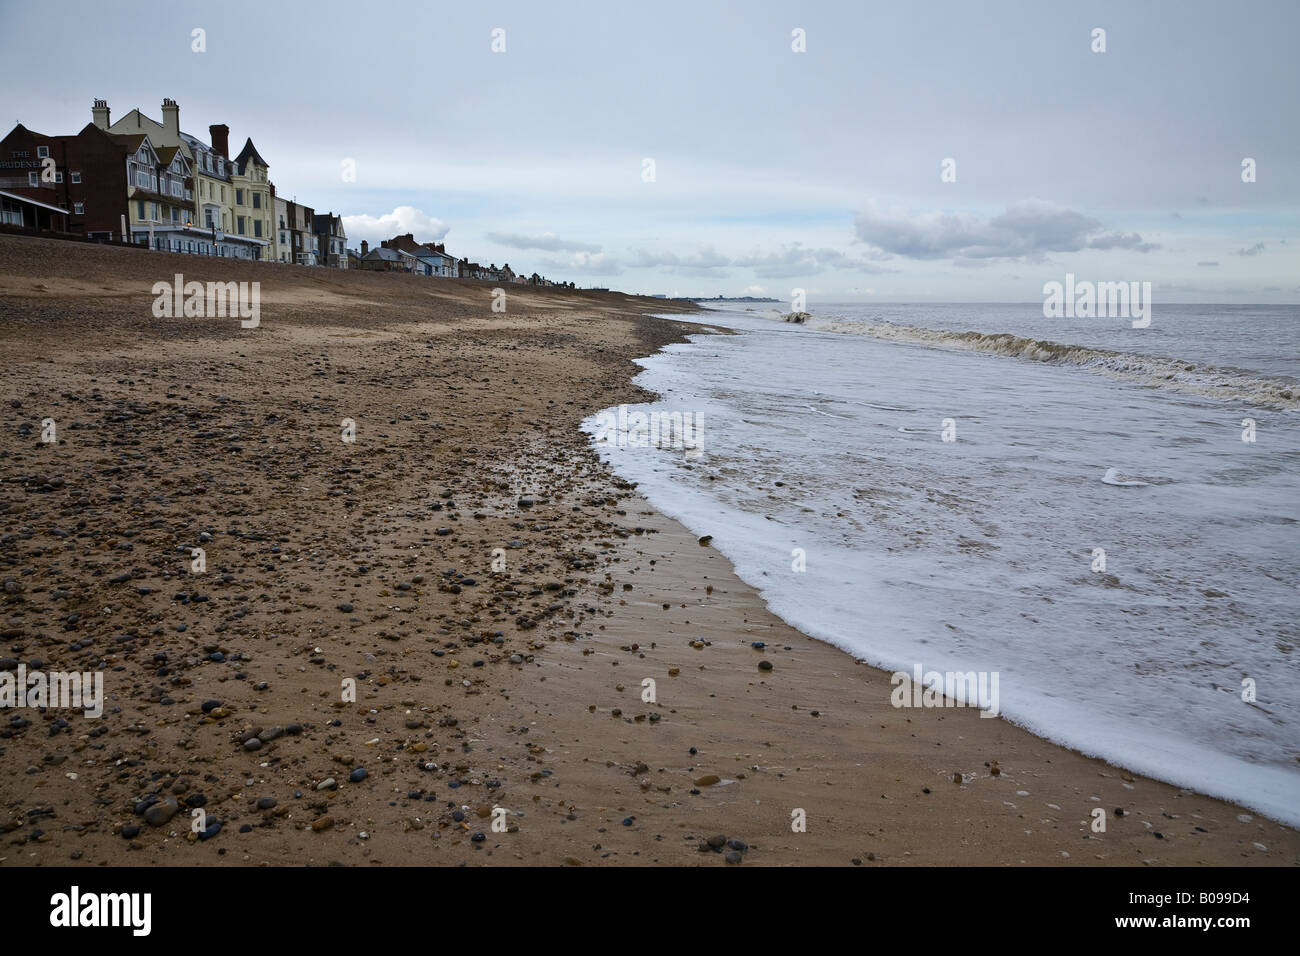 The beach at Aldeburgh in winter, Suffolk, England Stock Photo